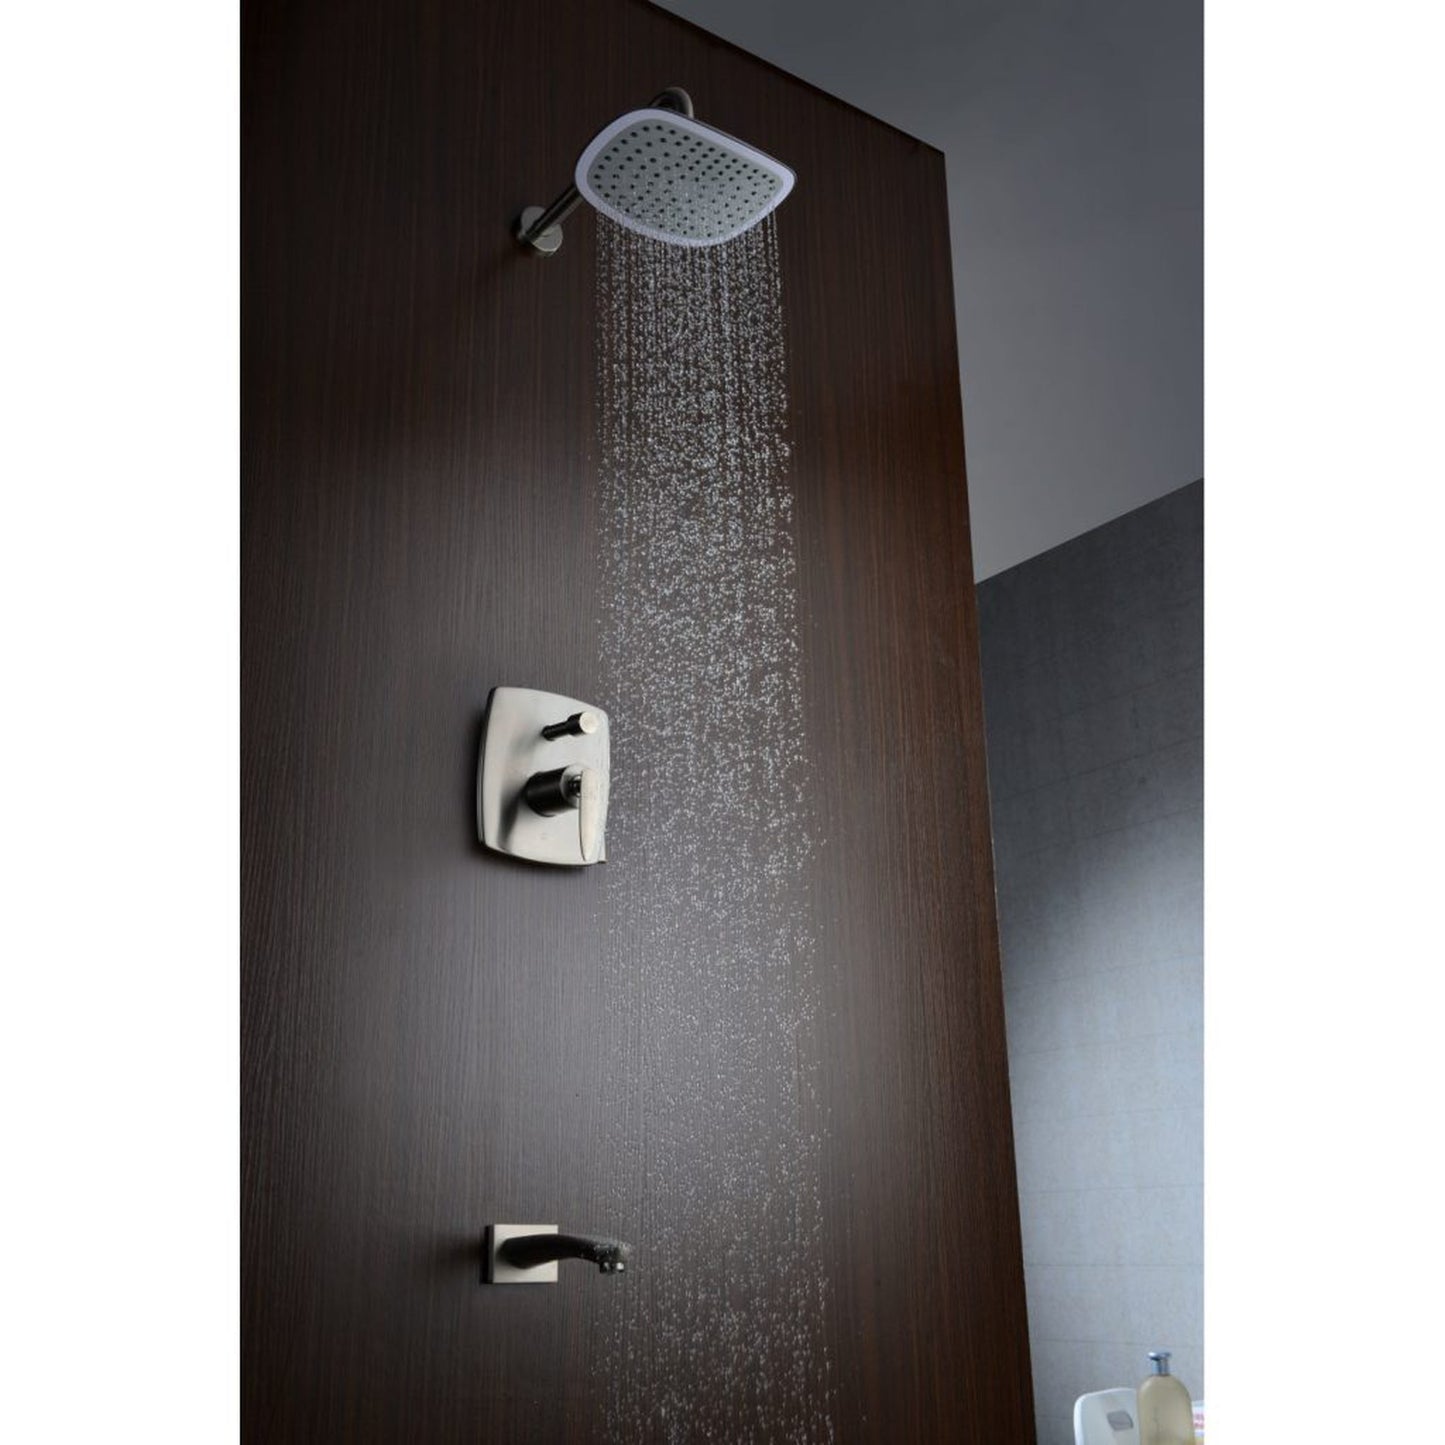 ANZZI Tempo Series Wall-Mounted Brushed Nickel Single Handle Heavy Rain Shower Head With Bath Faucet Set